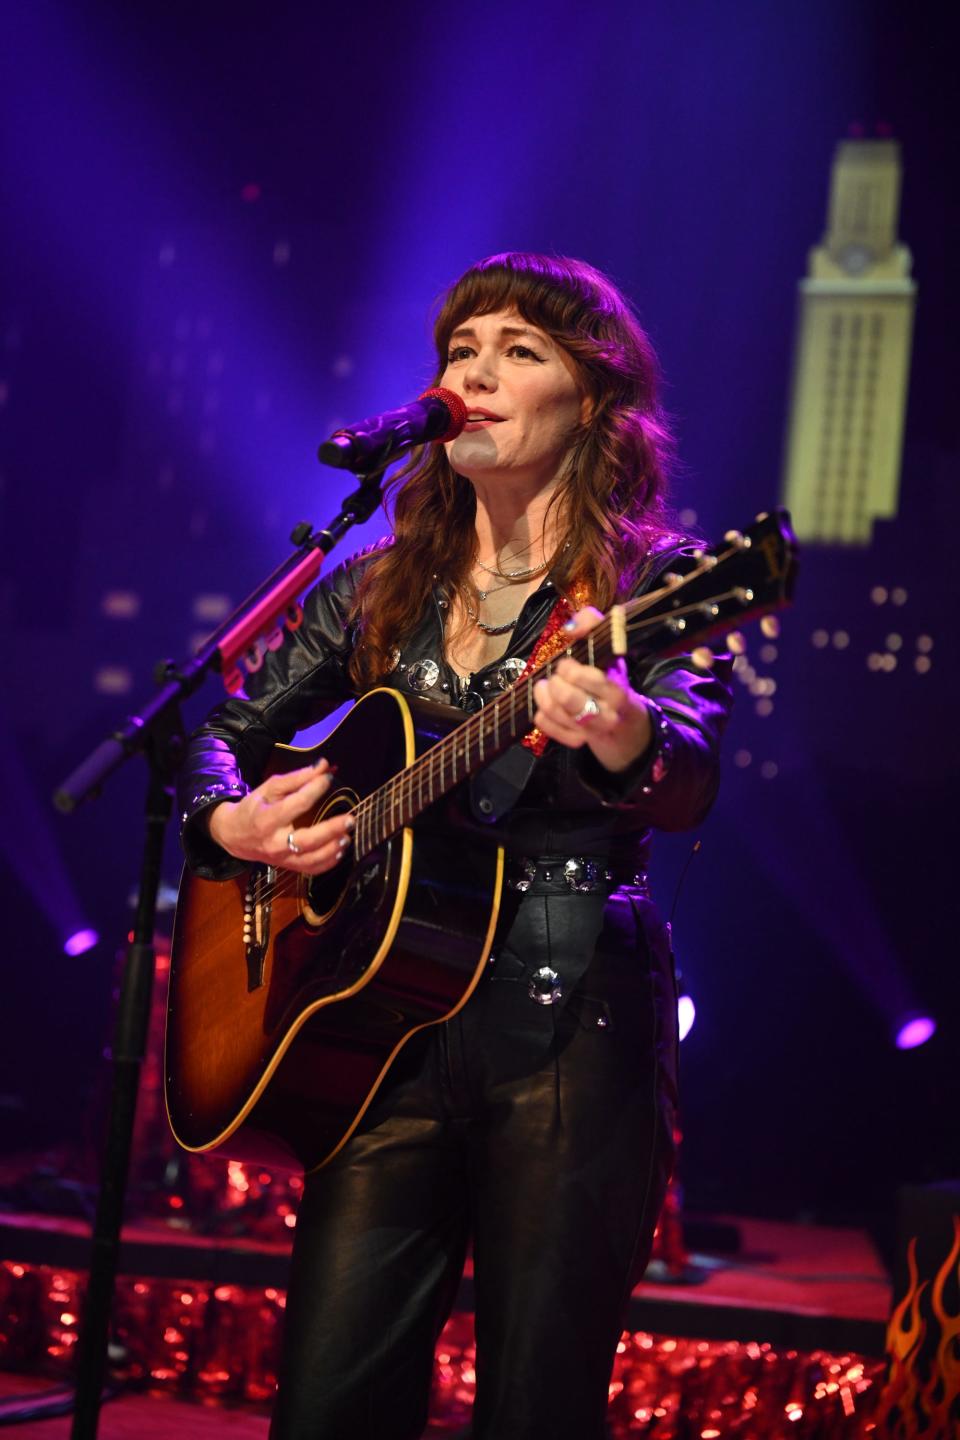 Fans cheered wildly after each song and cheers of "We love you, Jenny!" rang out regularly as Jenny Lewis taped her third episode of Austin's famed music television show.